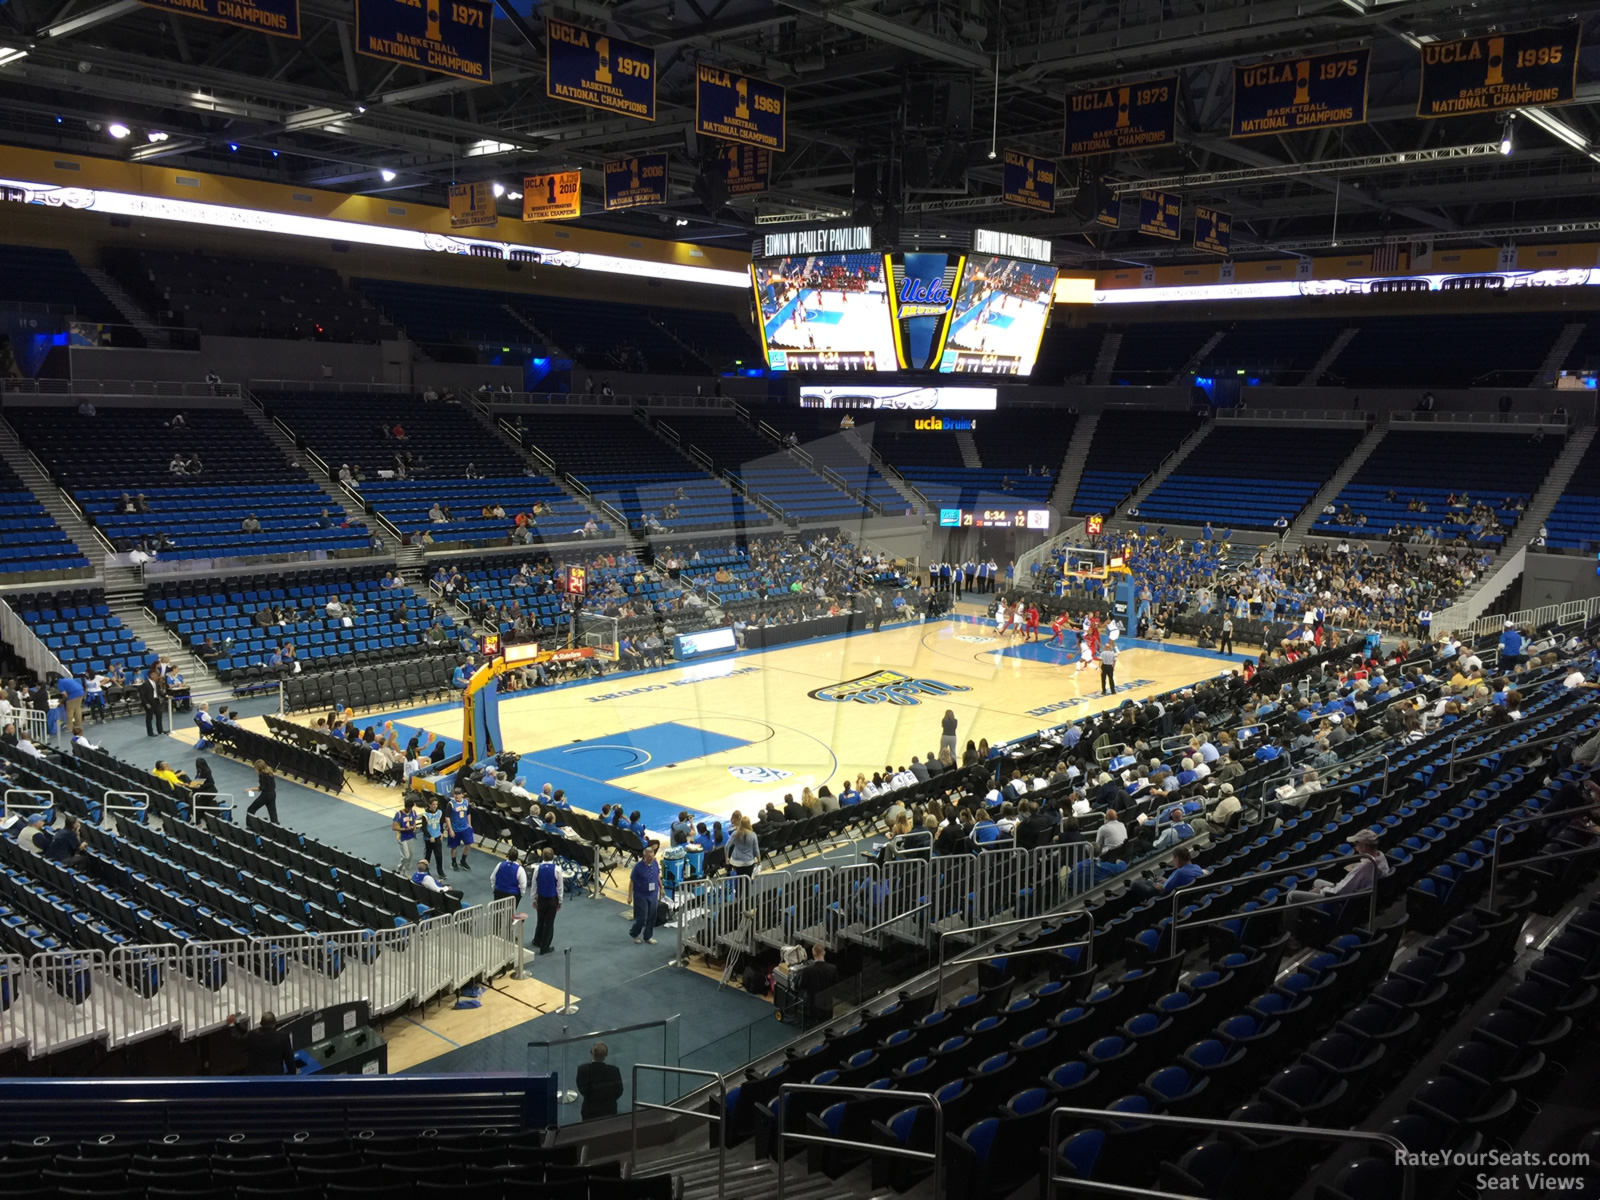 section 105, row 13 seat view  - pauley pavilion